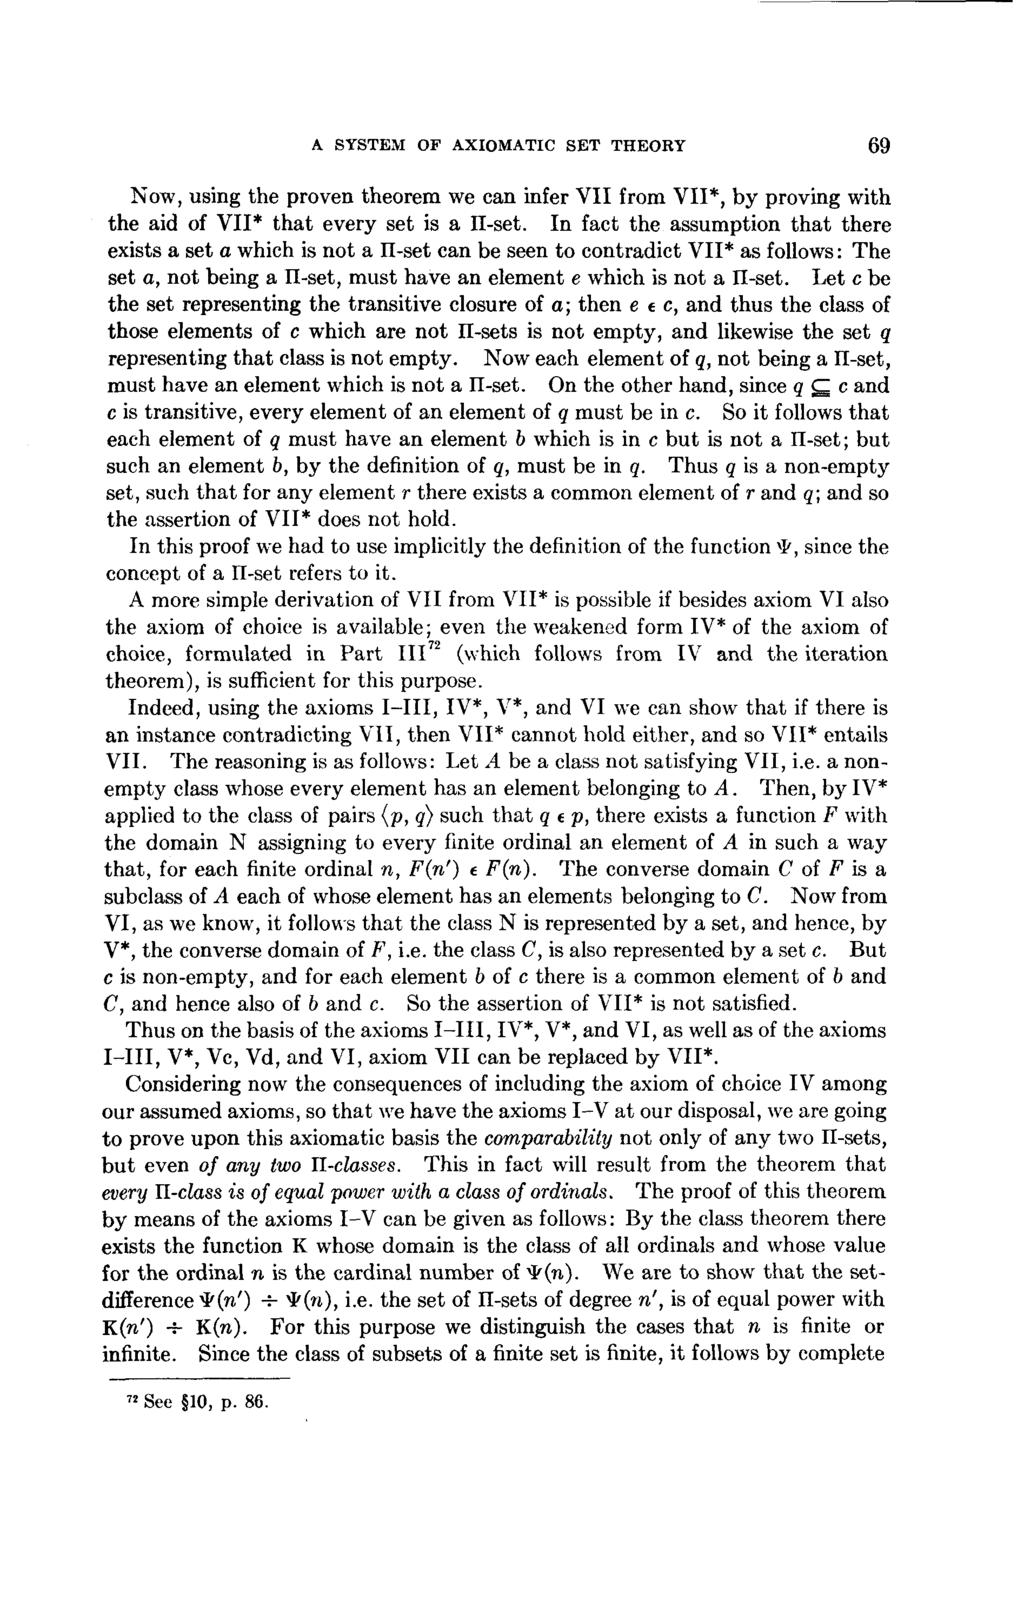 A SYSTEM OF AXIOMATIC SET THEORY 69 Now, using the proven theorem we can infer VII from VII*, by proving with the aid of VII* that every set is a II-set.